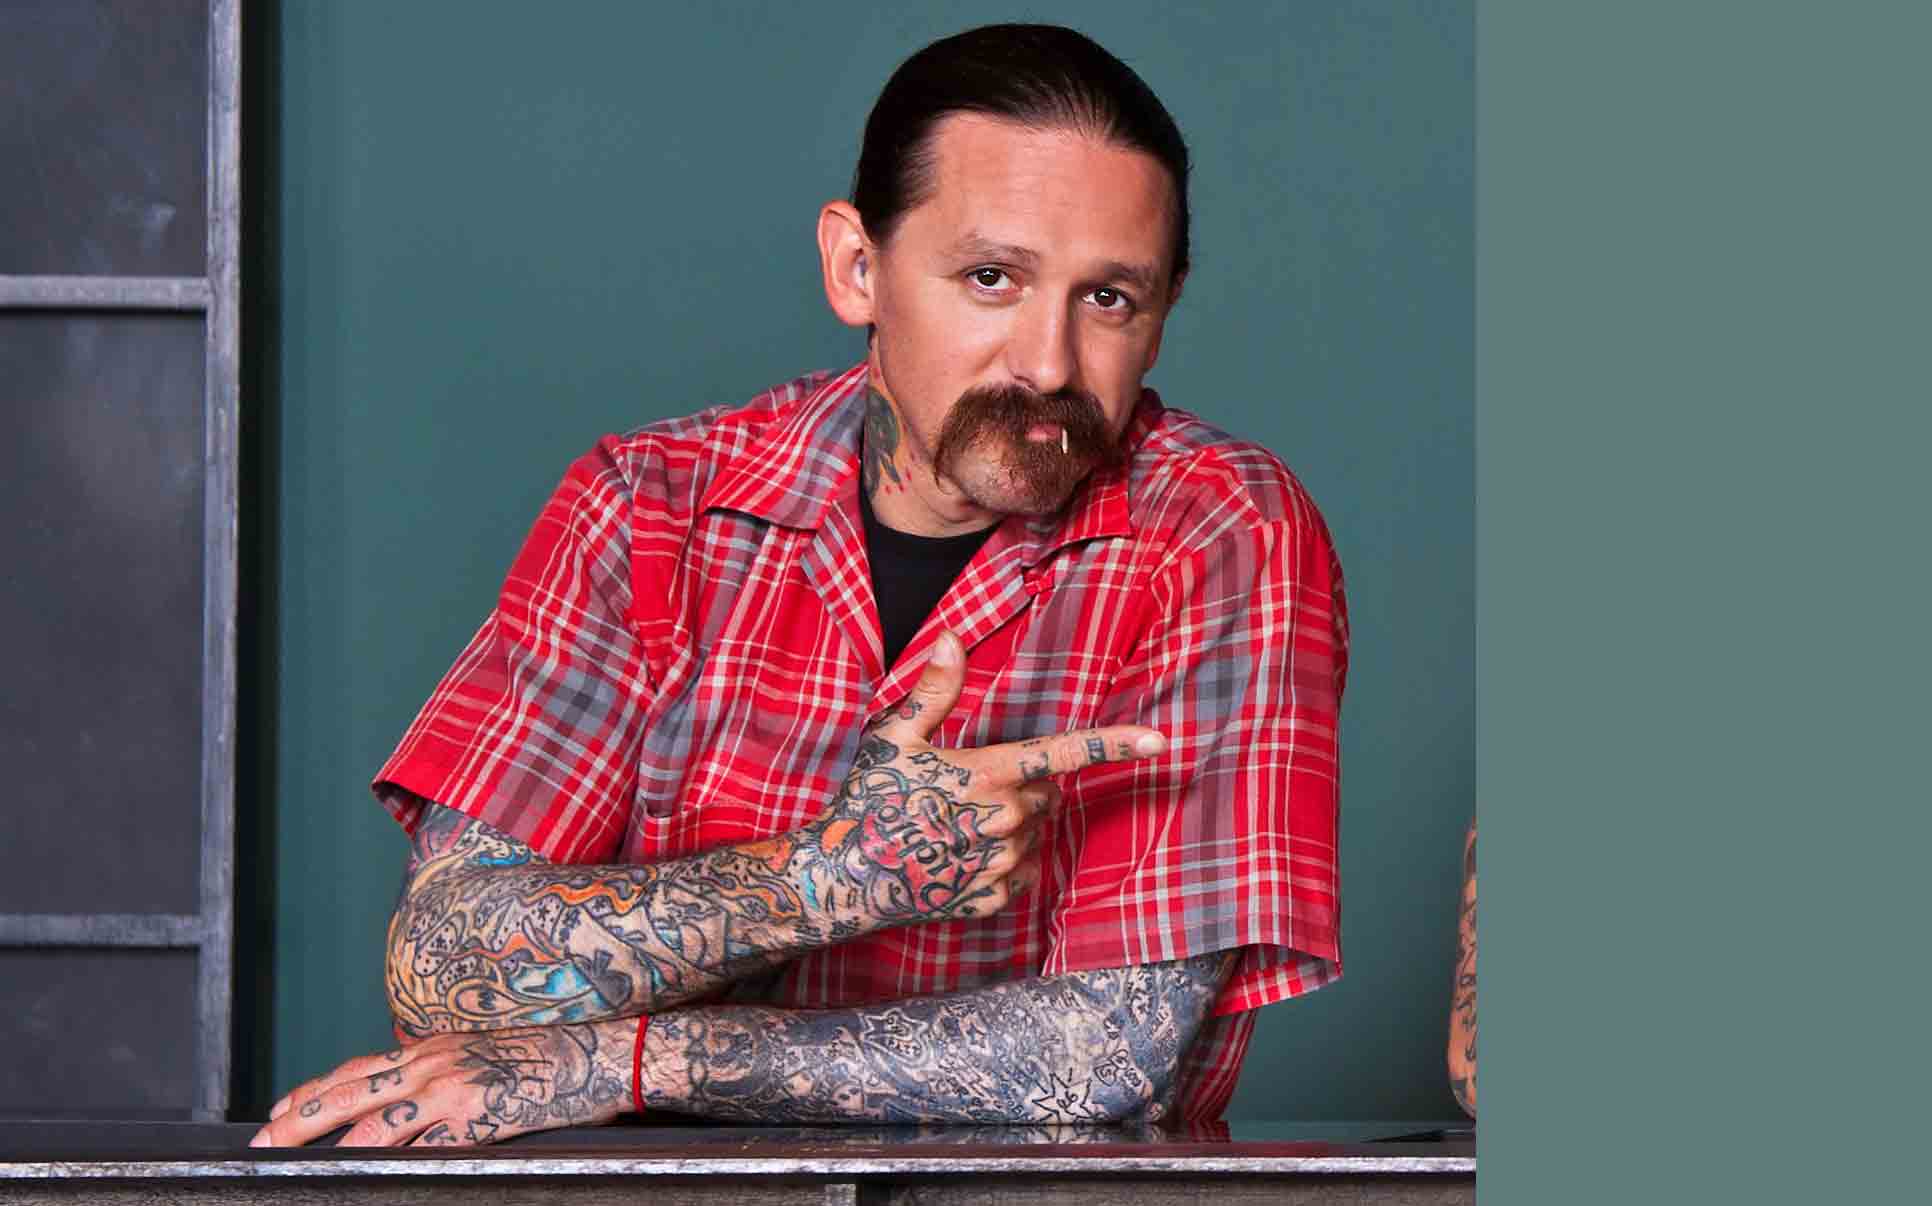 Oliver Peck Tattoos, Age, Net Worth, Wiki, Height, Wife, Relationship, Dating